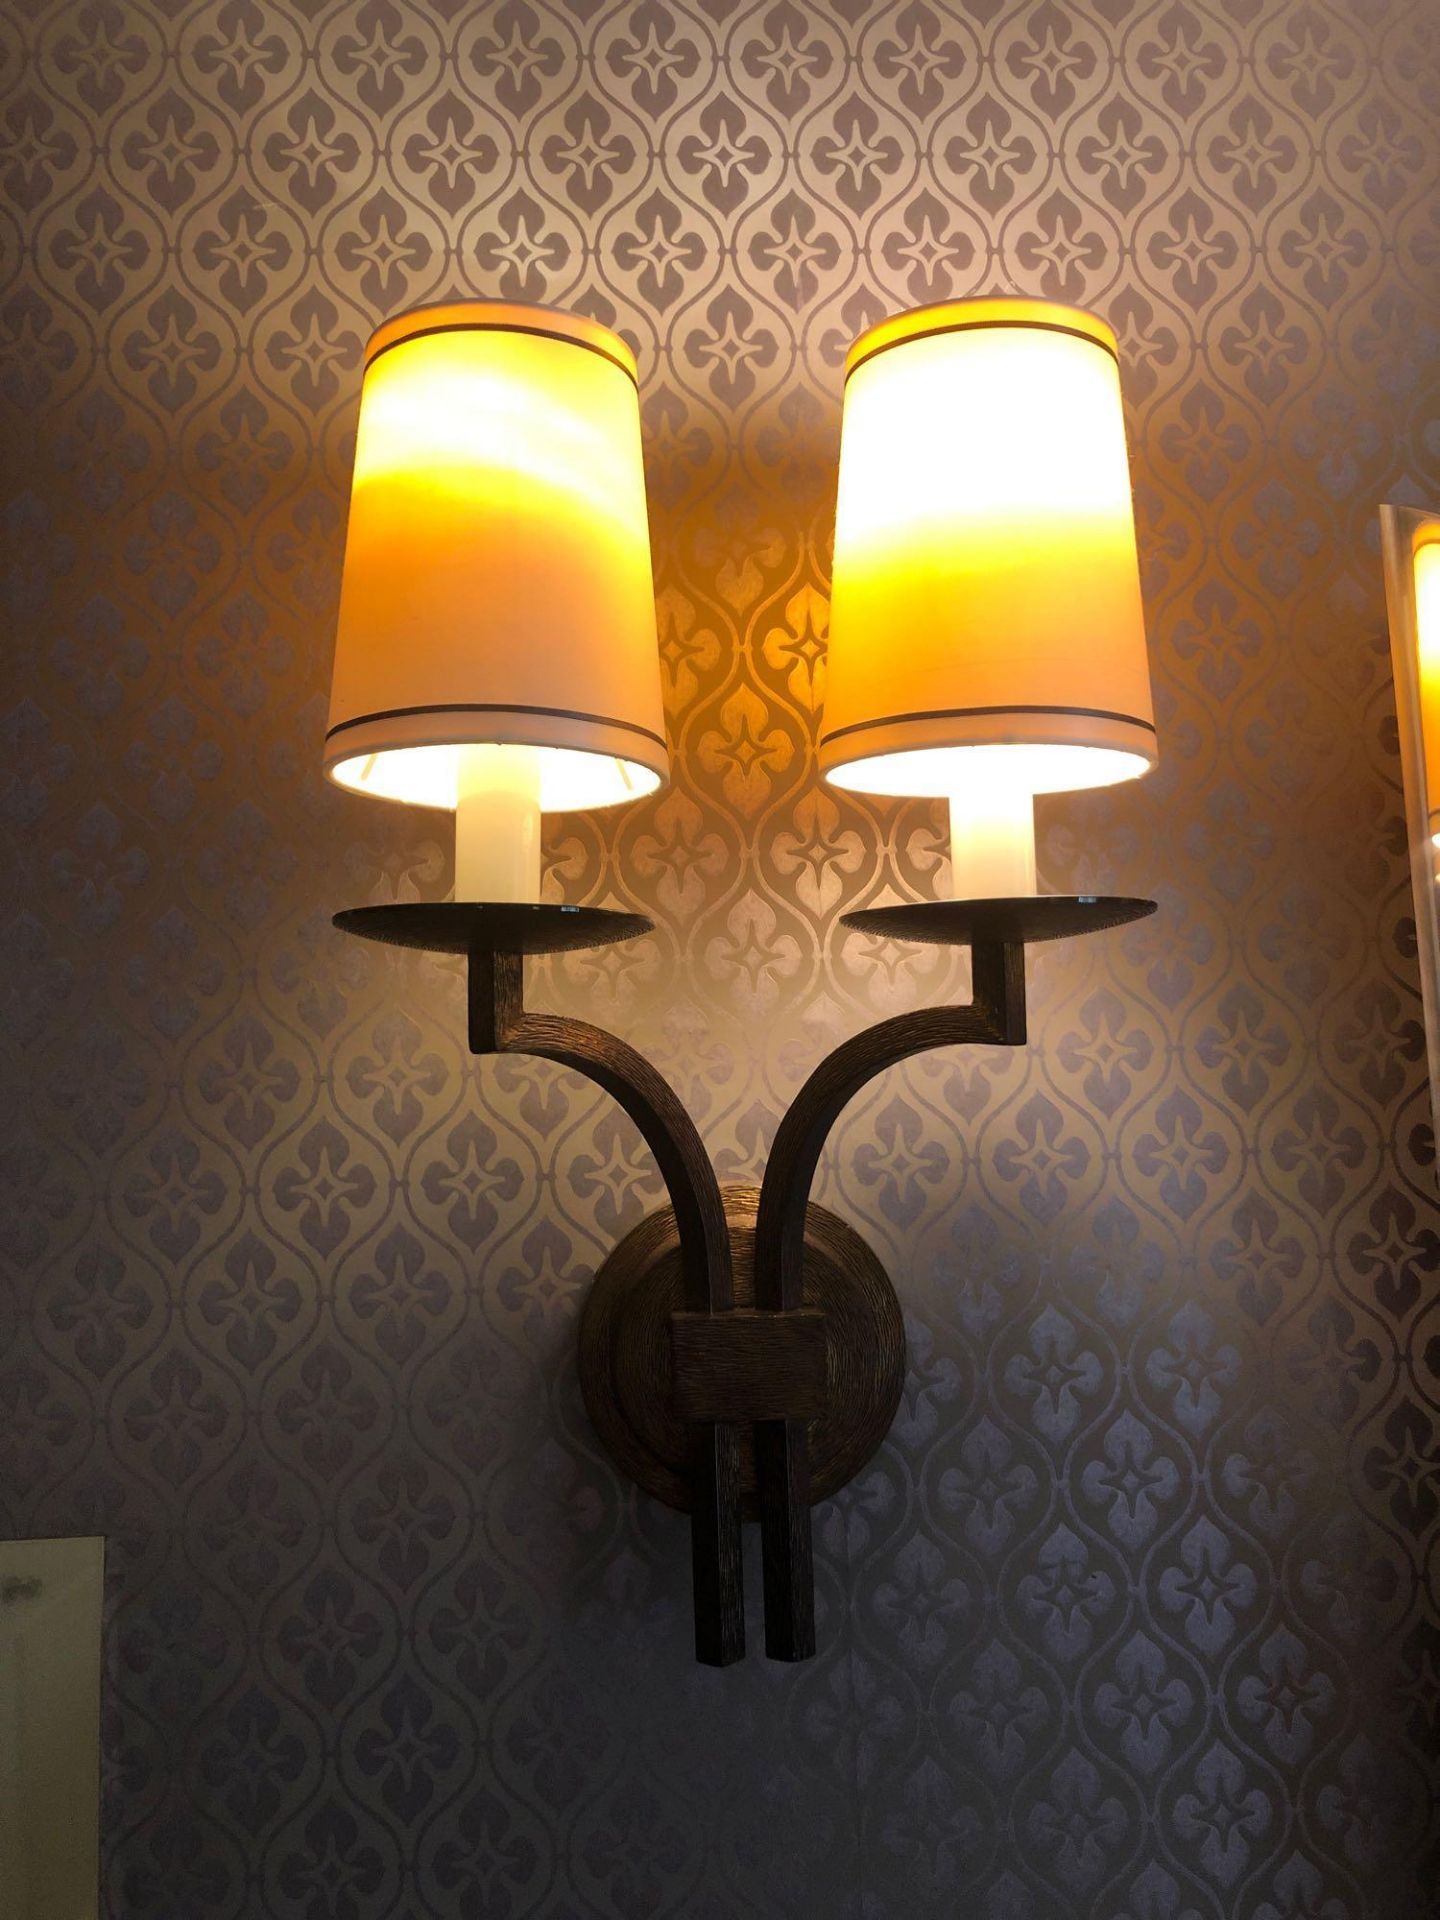 A Pair Of Dernier And Hamlyn Twin Arm Antique Bronzed Wall Sconces With Shade 51cm (Room 514)